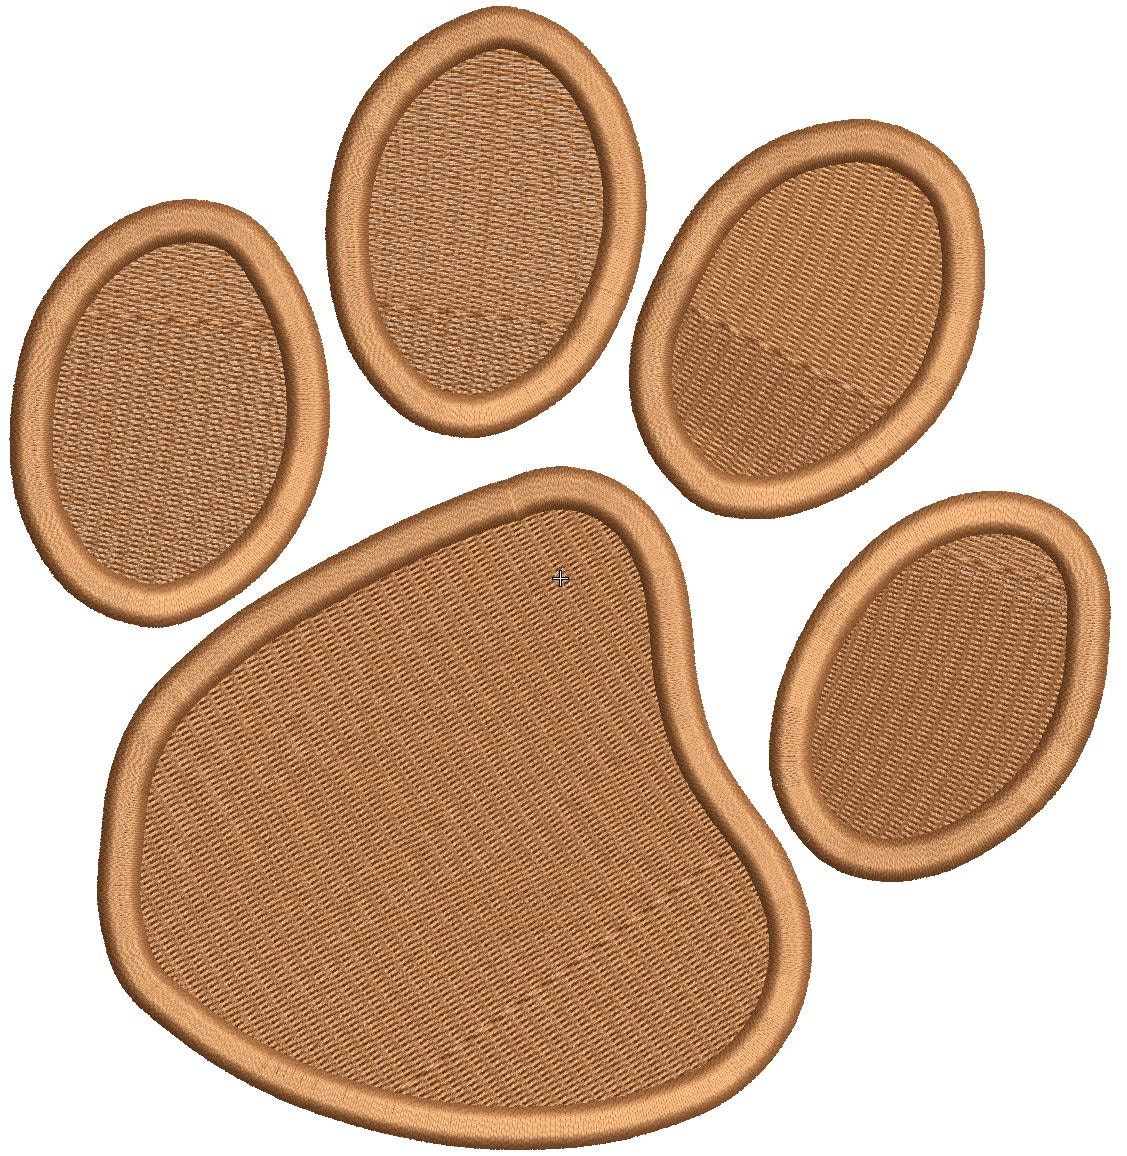 paw-print-embroidery-design-download-3-sizes-instant